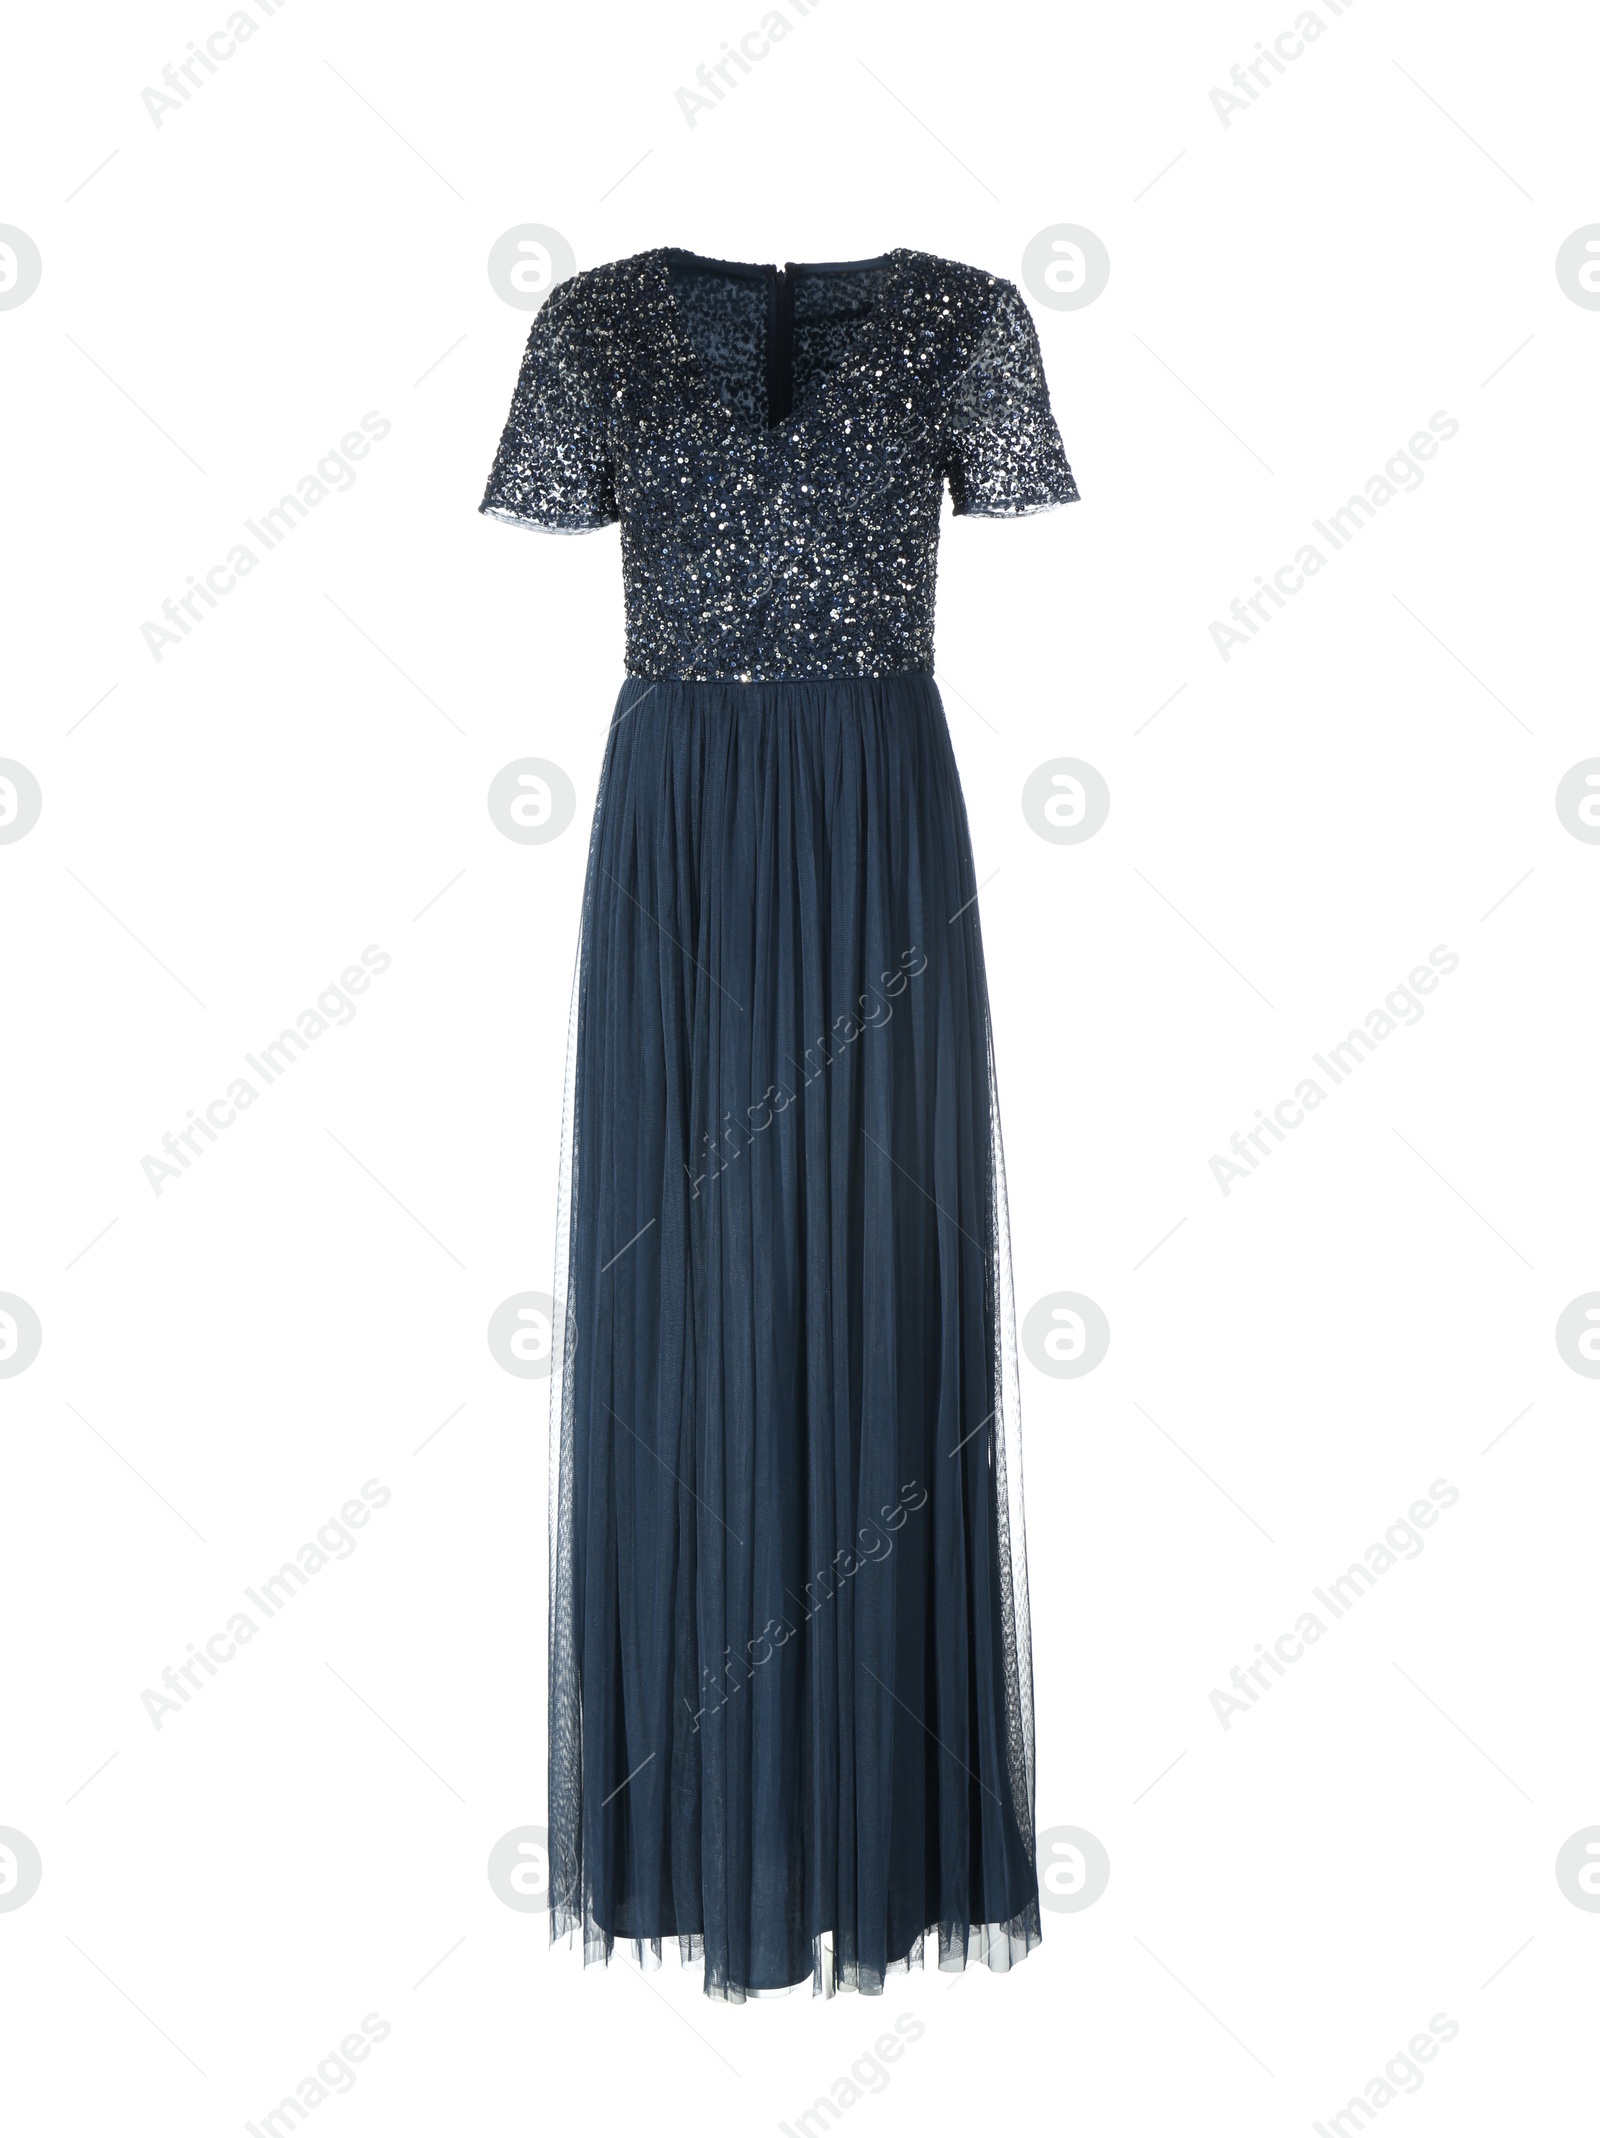 Photo of Elegant blue dress on mannequin against white background. Women's clothes